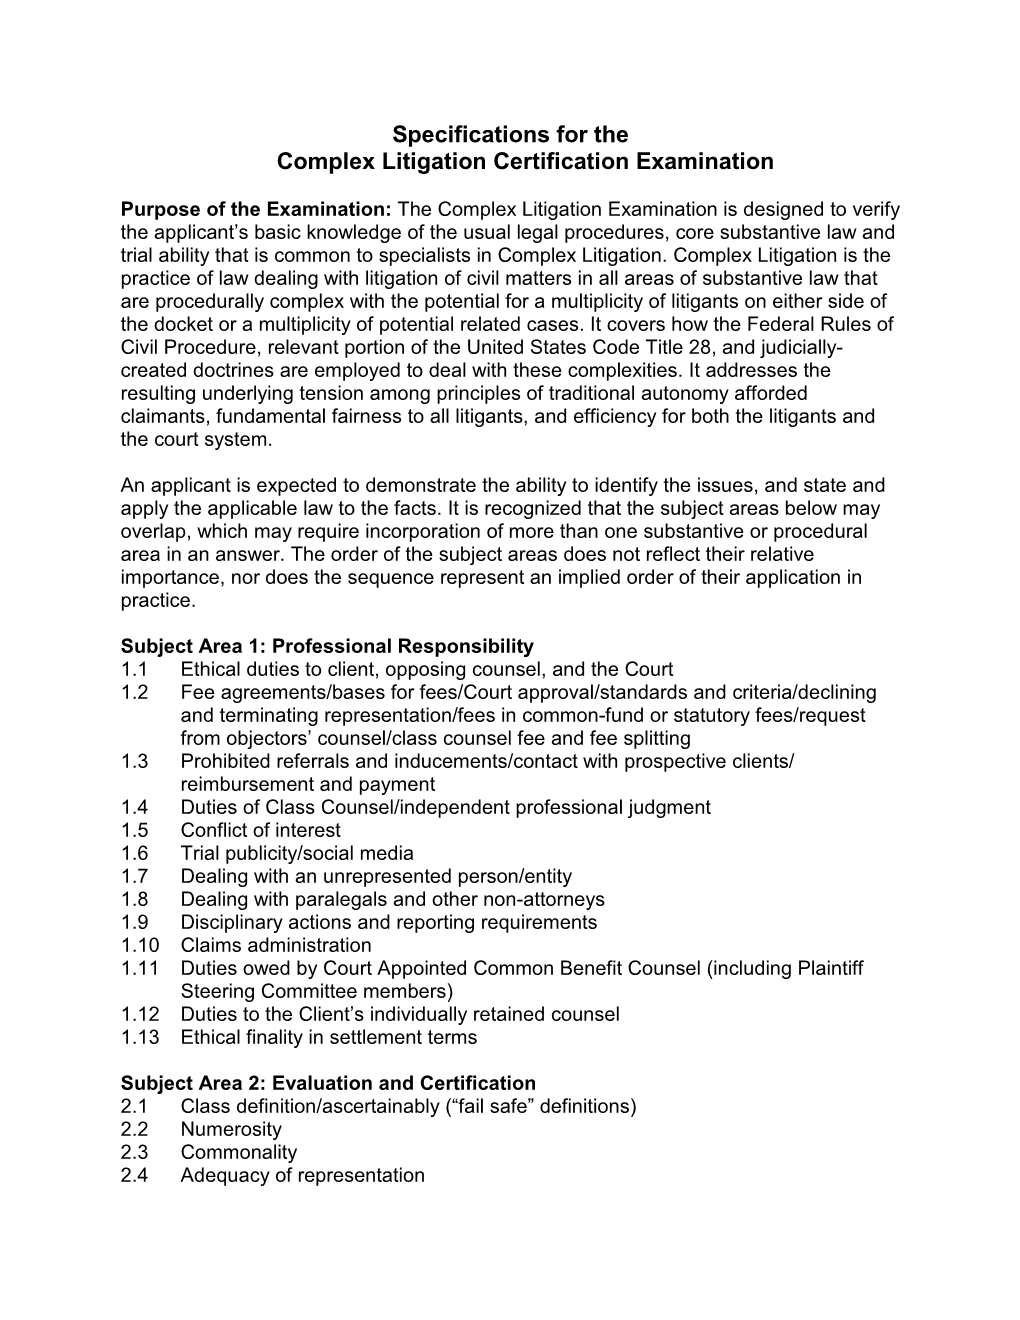 Specifications for the Complex Litigation Certification Examination